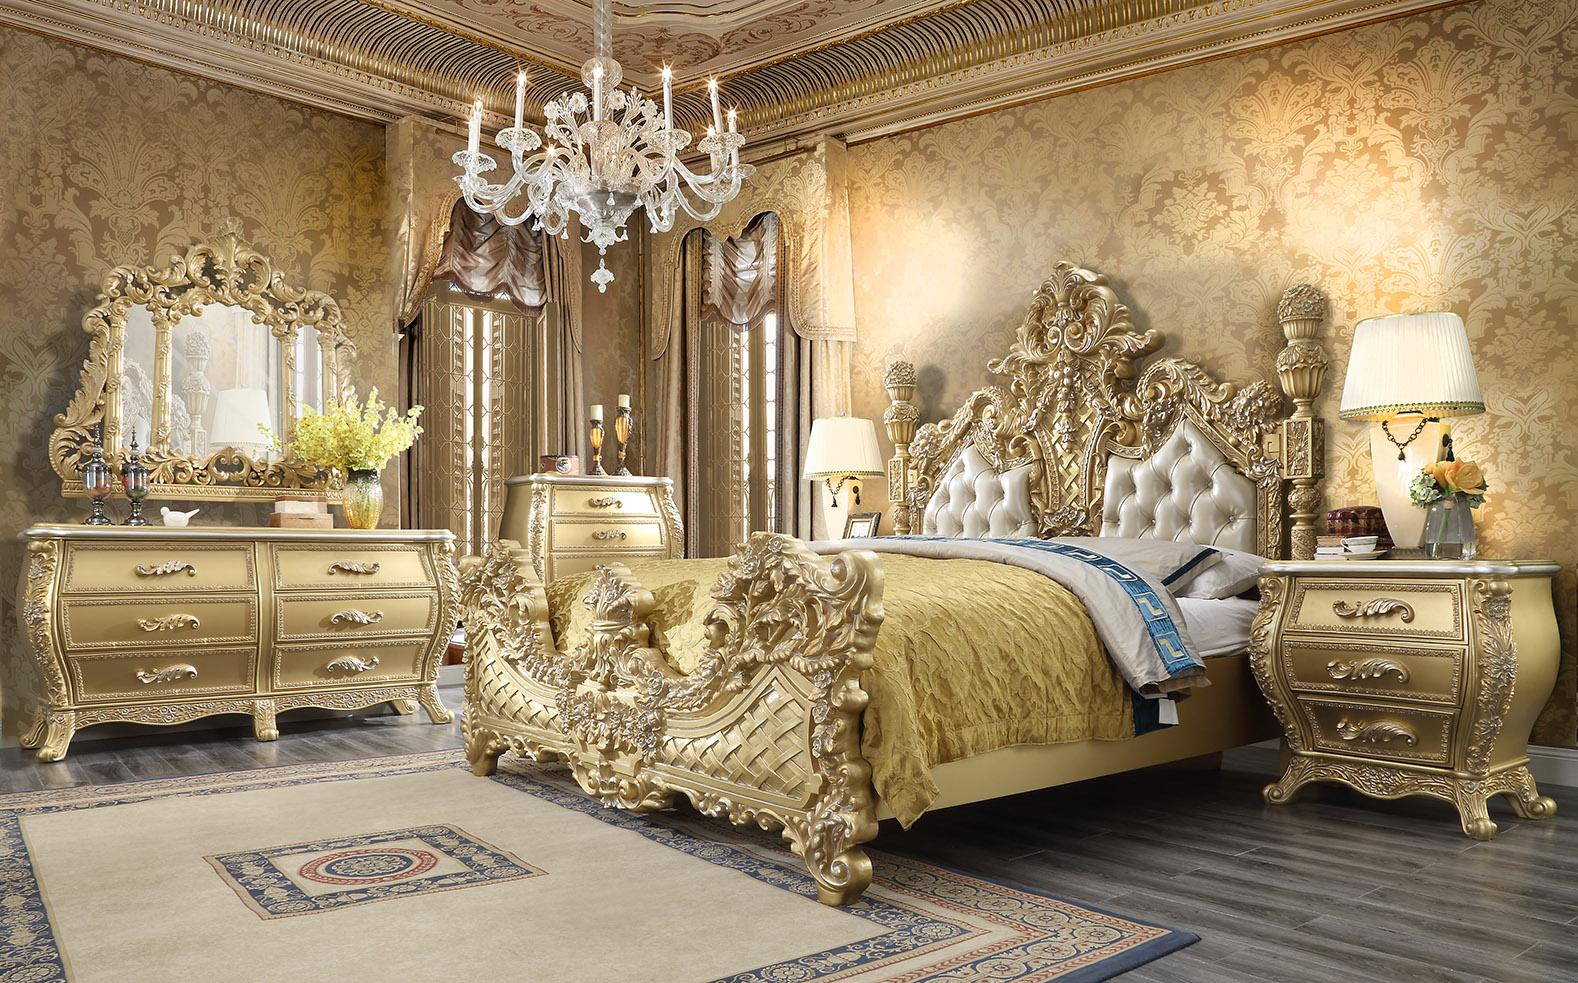 

    
HD-CK1801-3PC Antique Gold & Leather Cal King Bedroom Set 3Pcs Traditional Homey Design HD-1801
